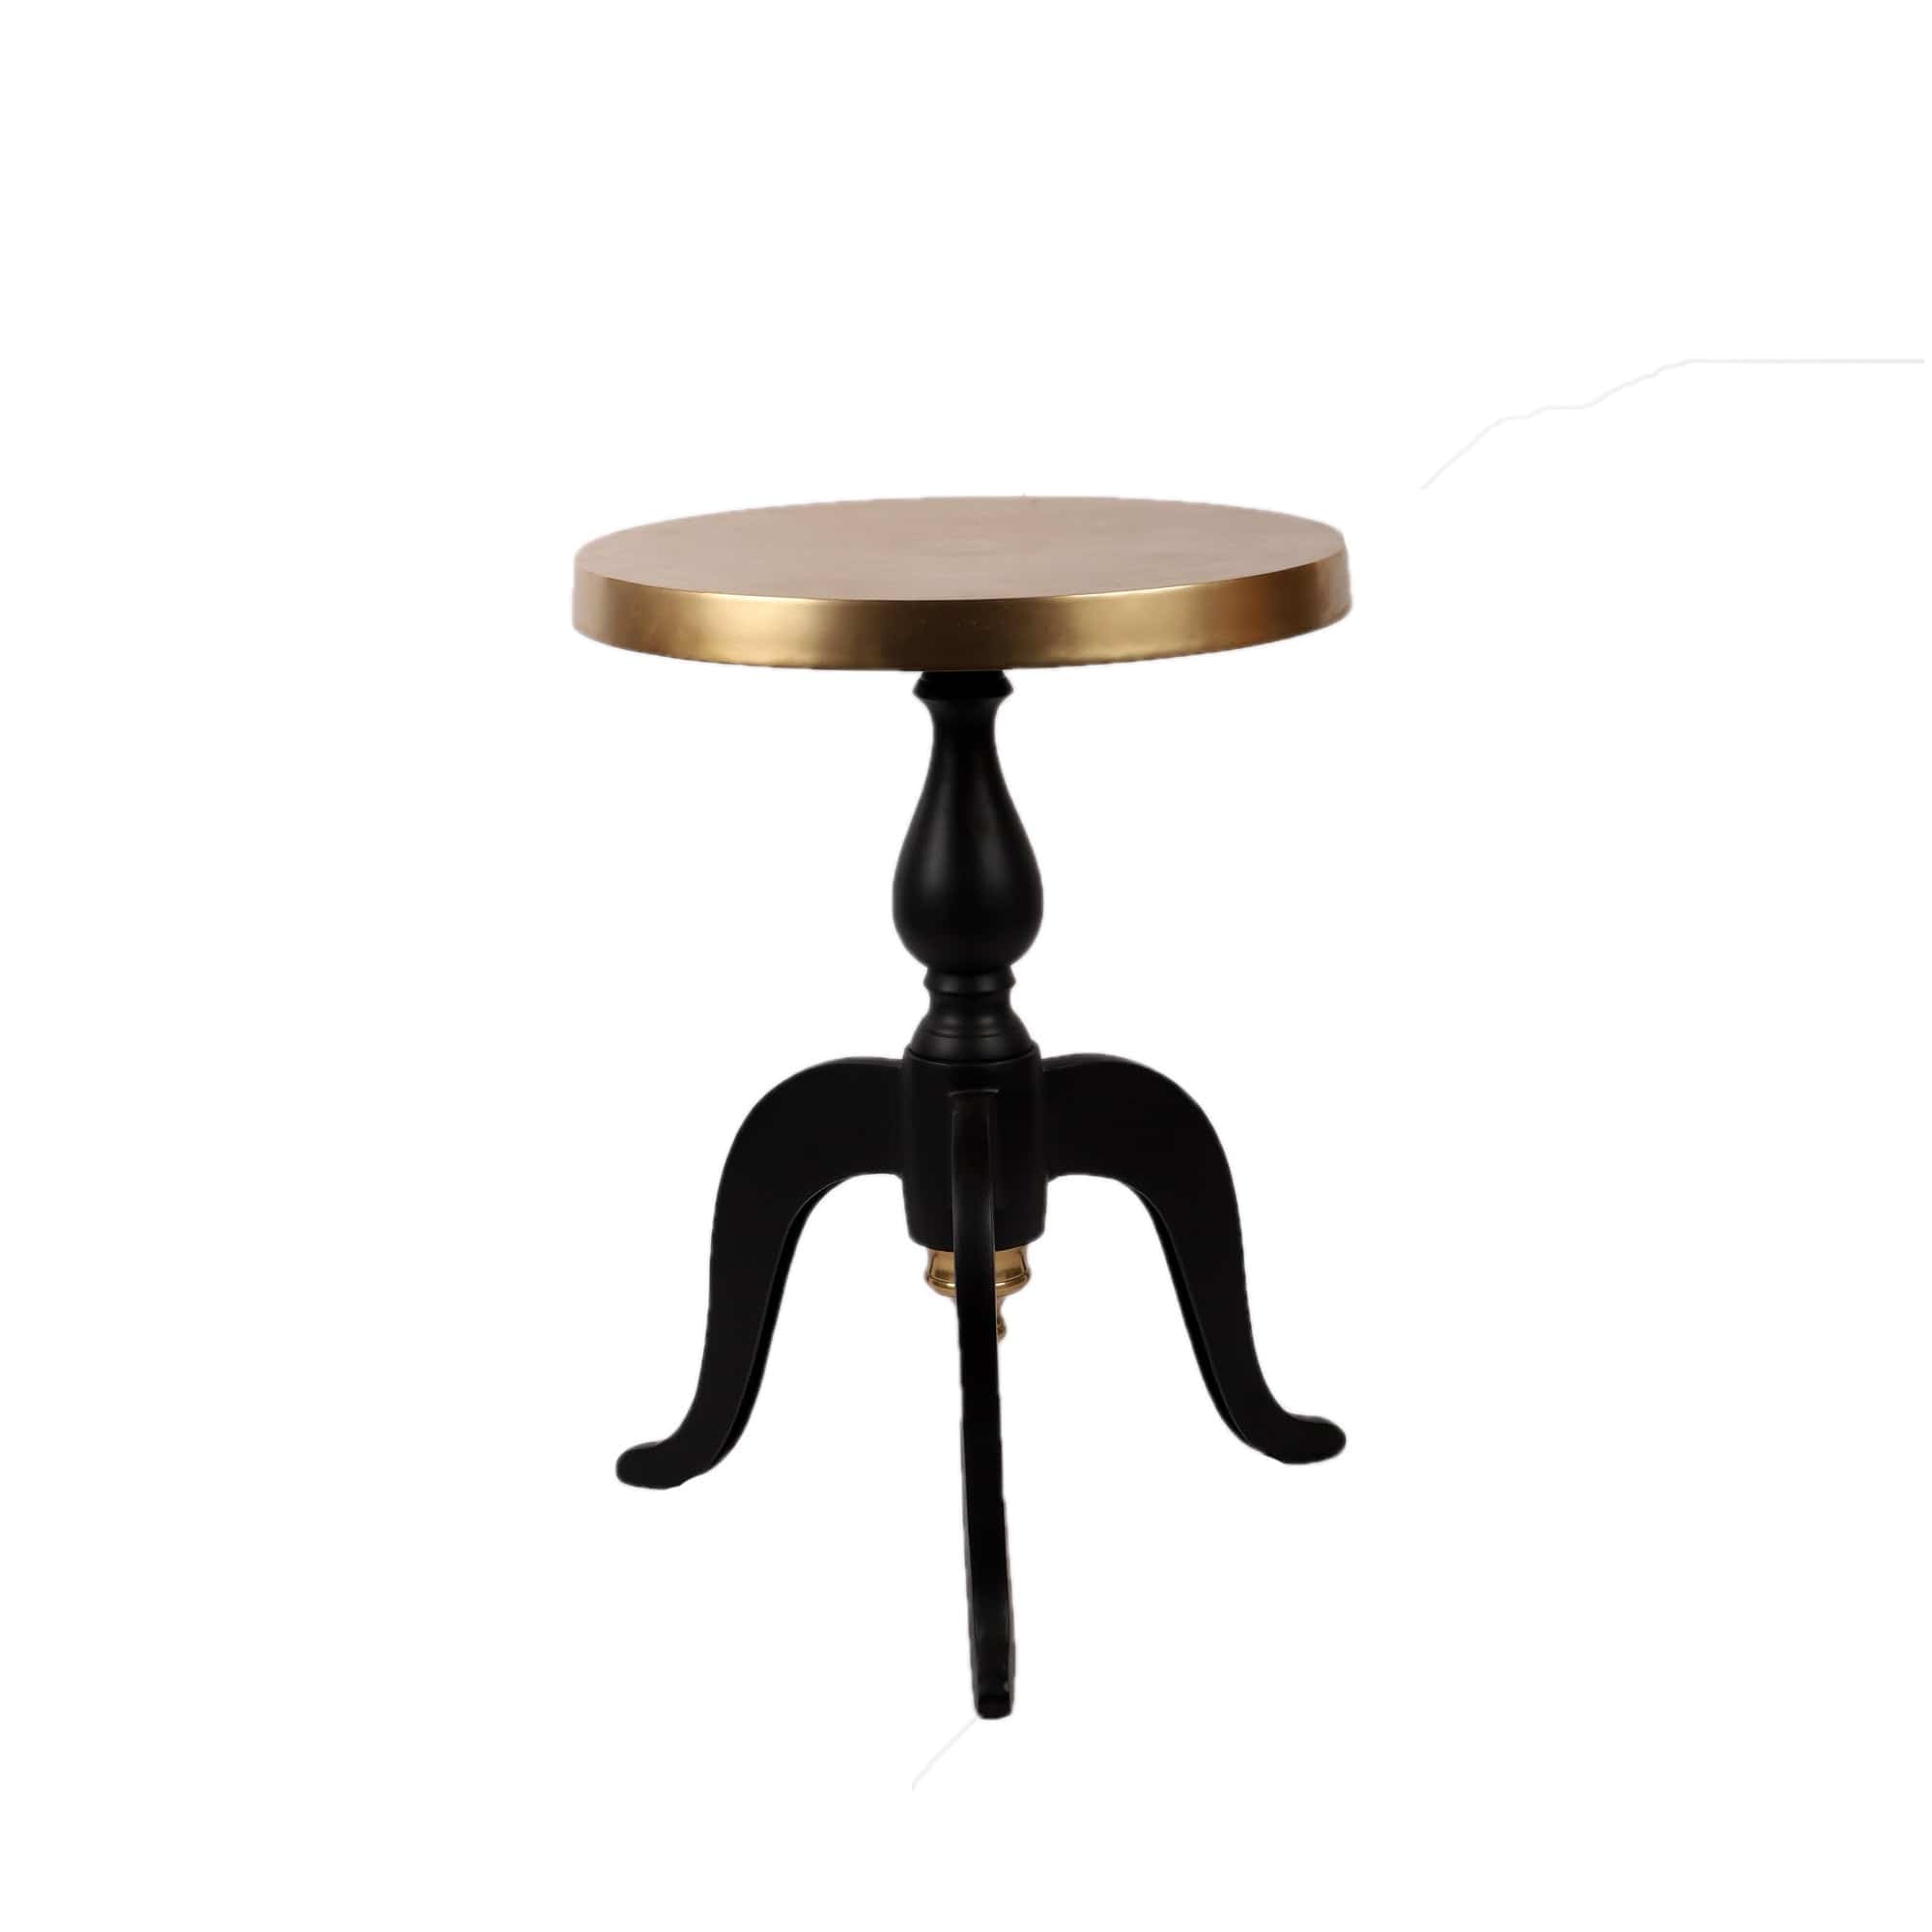 3 Leg Table in Gold And Black finish